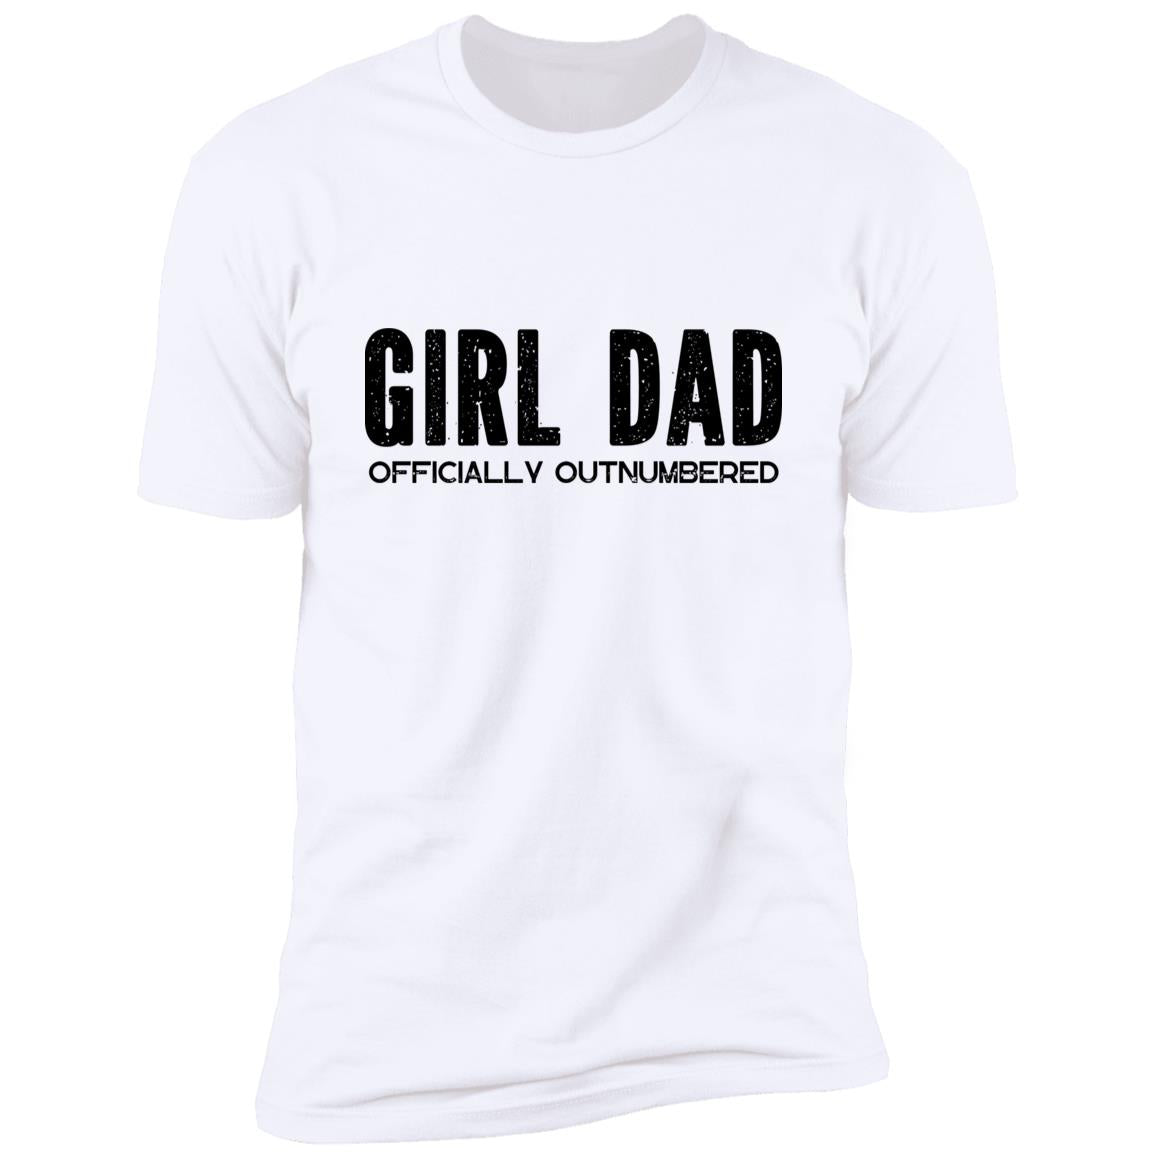 Girl Dad Officially Outnumbered TShirt